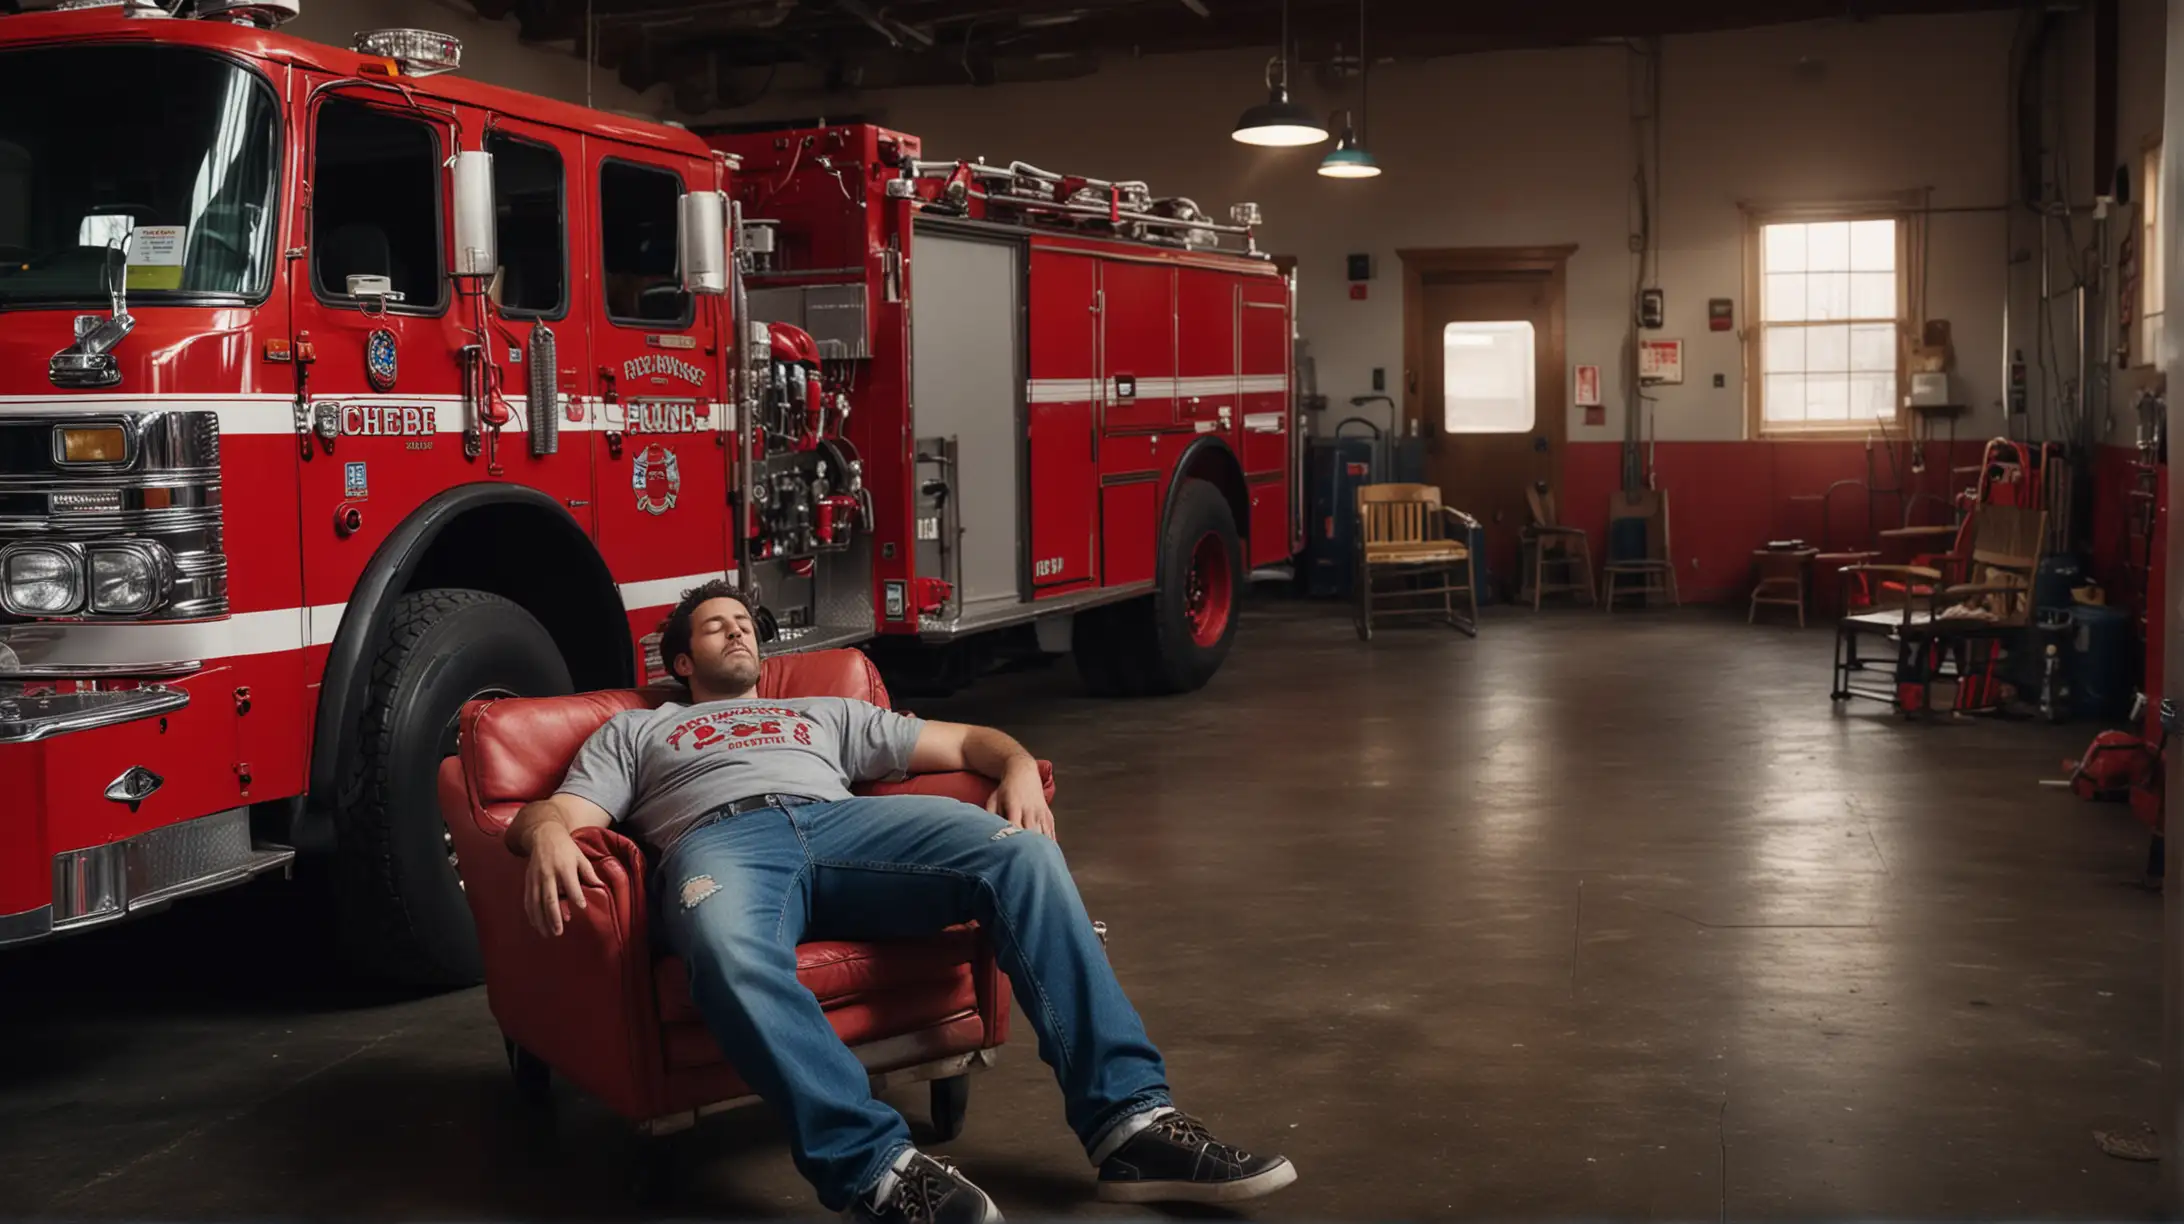 Interior of a firehouse, 1 large red firetruck, 1 man in a teeshirt and jeans asleep in a chair. Cinematic lighting, photographic quality, vibrant colors.